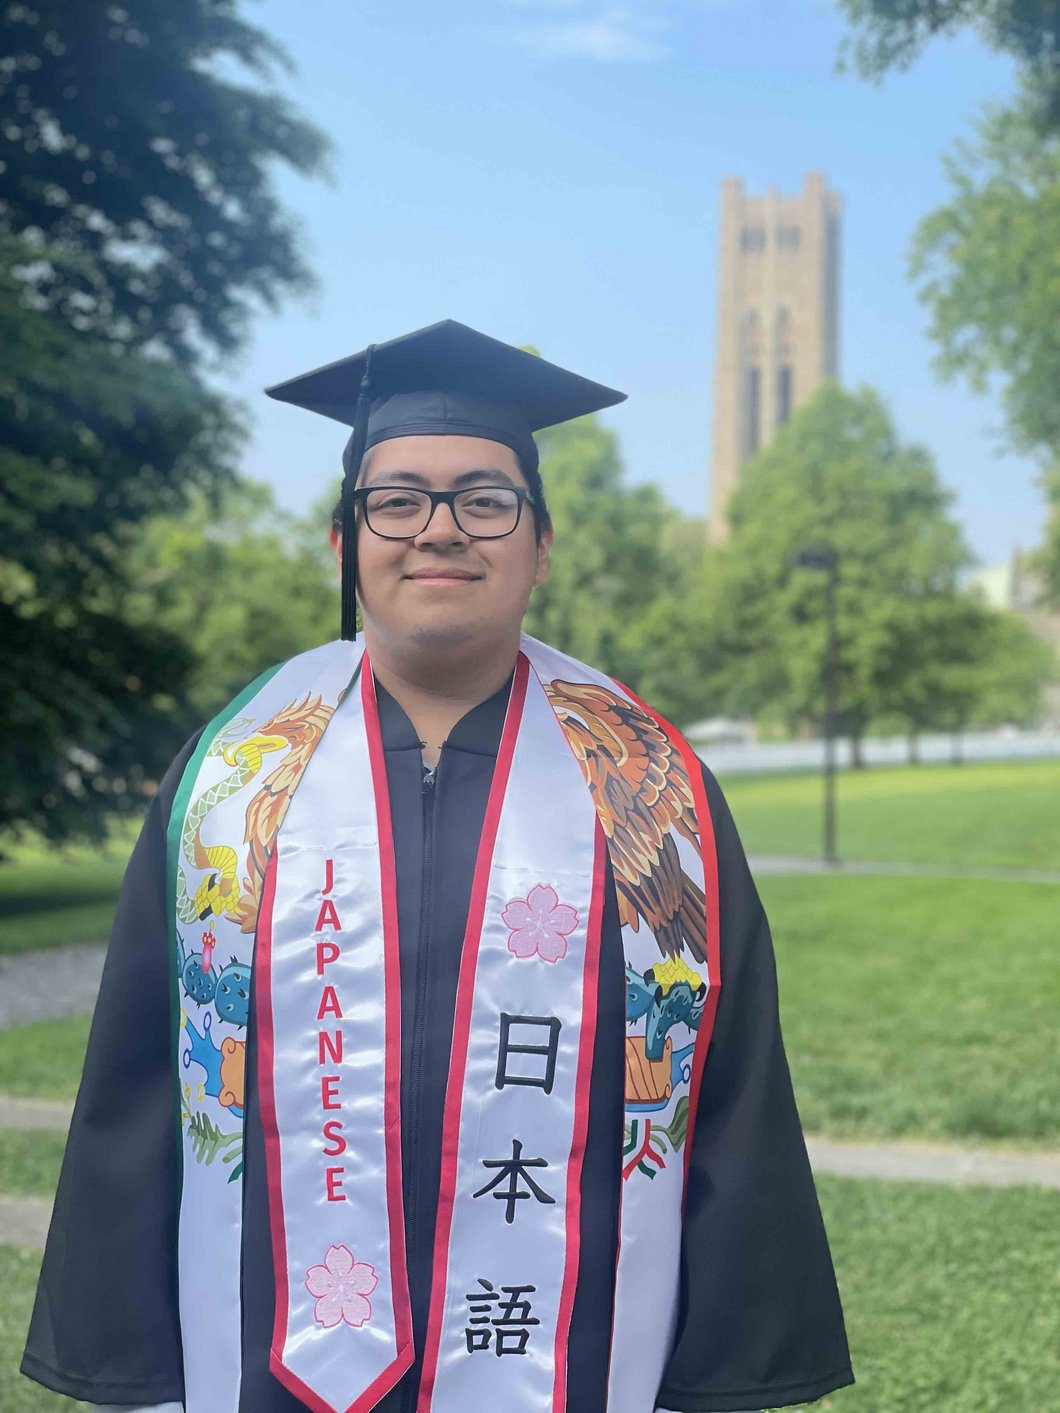 Japanese section graduate with cap and gown standing in front of Clothier Bell Tower